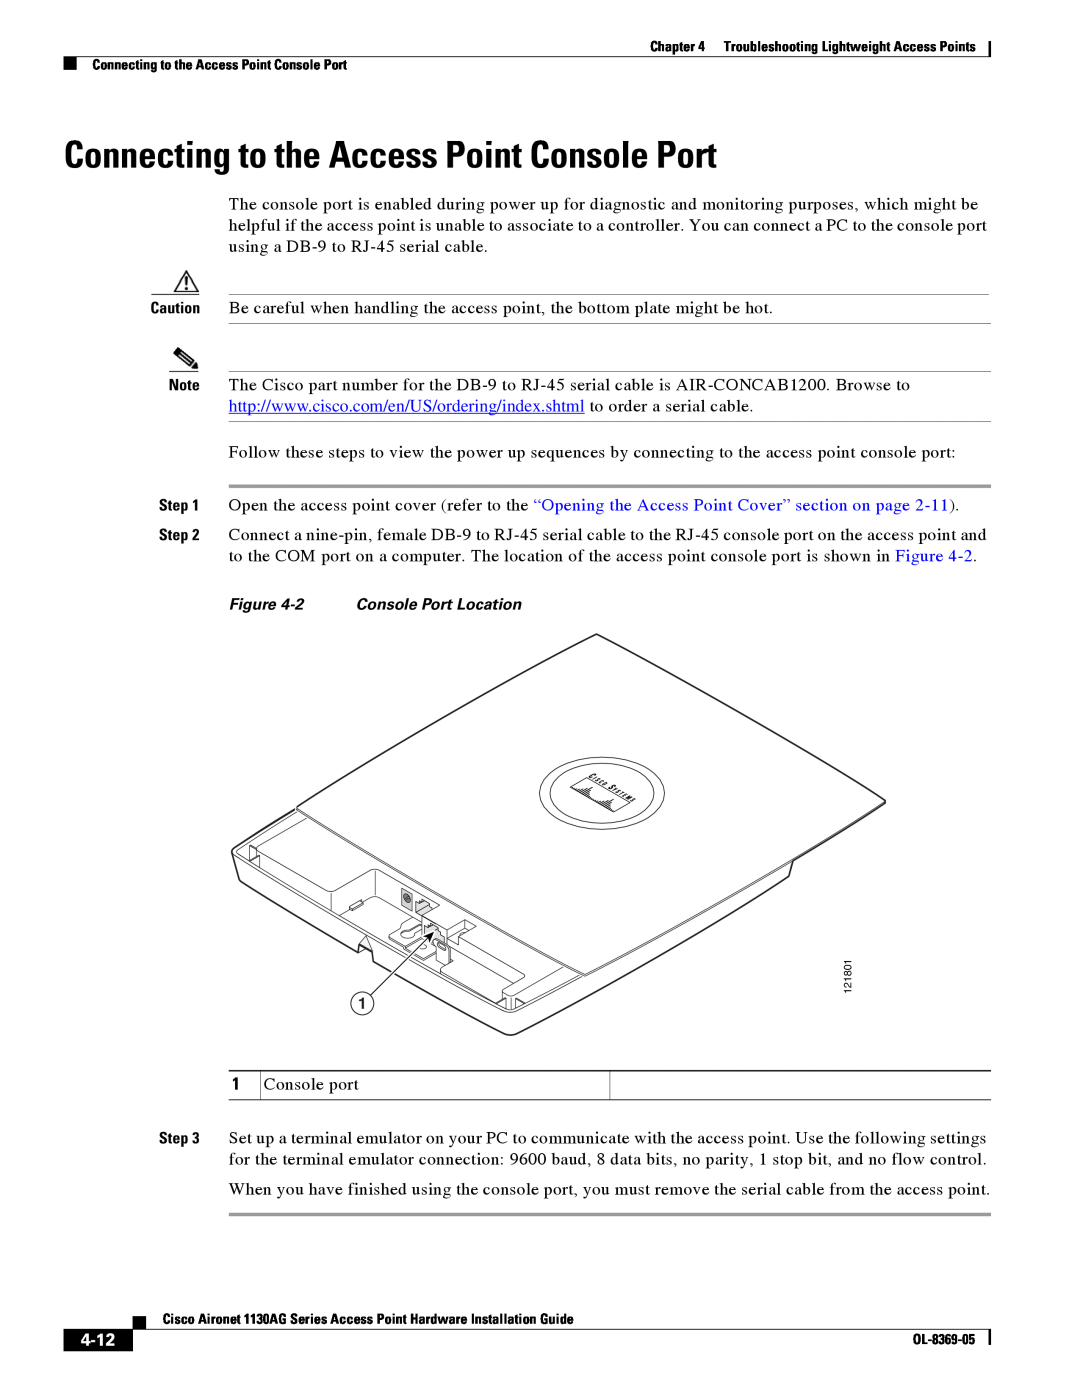 Cisco Systems 1130AG manual Connecting to the Access Point Console Port, 4-12, 2 Console Port Location 